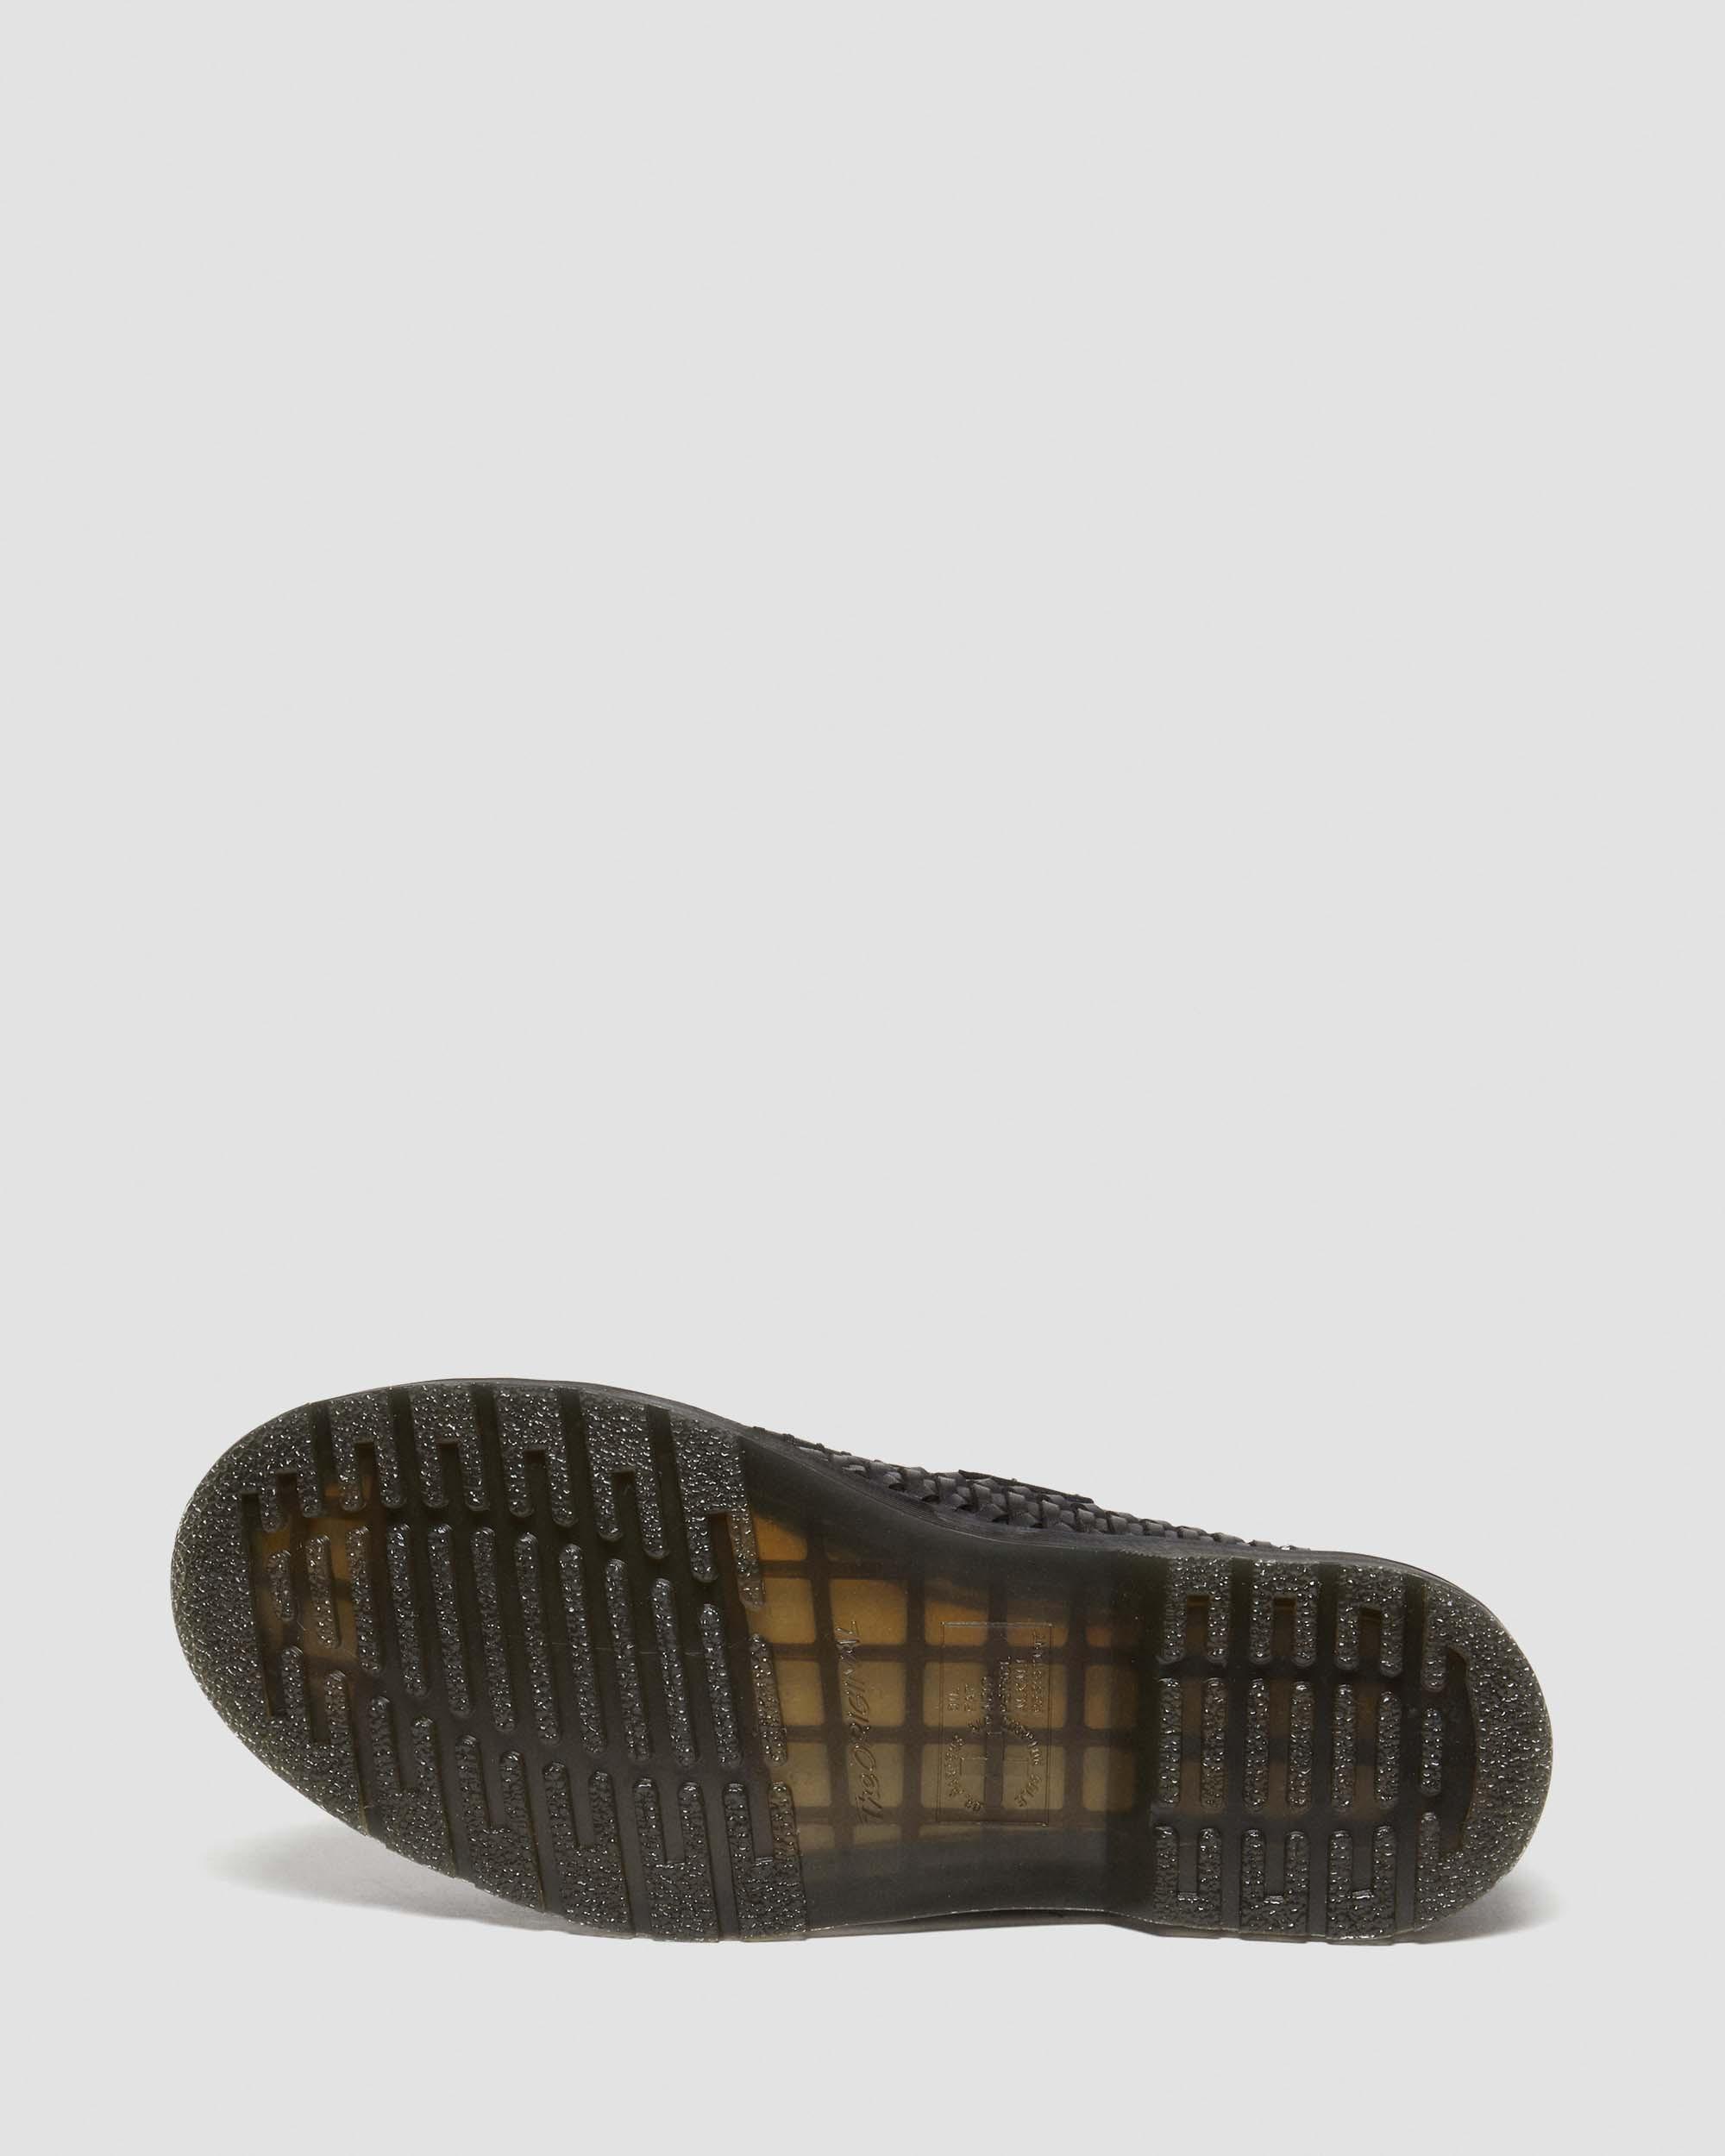 Adrian T-Bar Woven Leather Mary Jane Shoes in Black